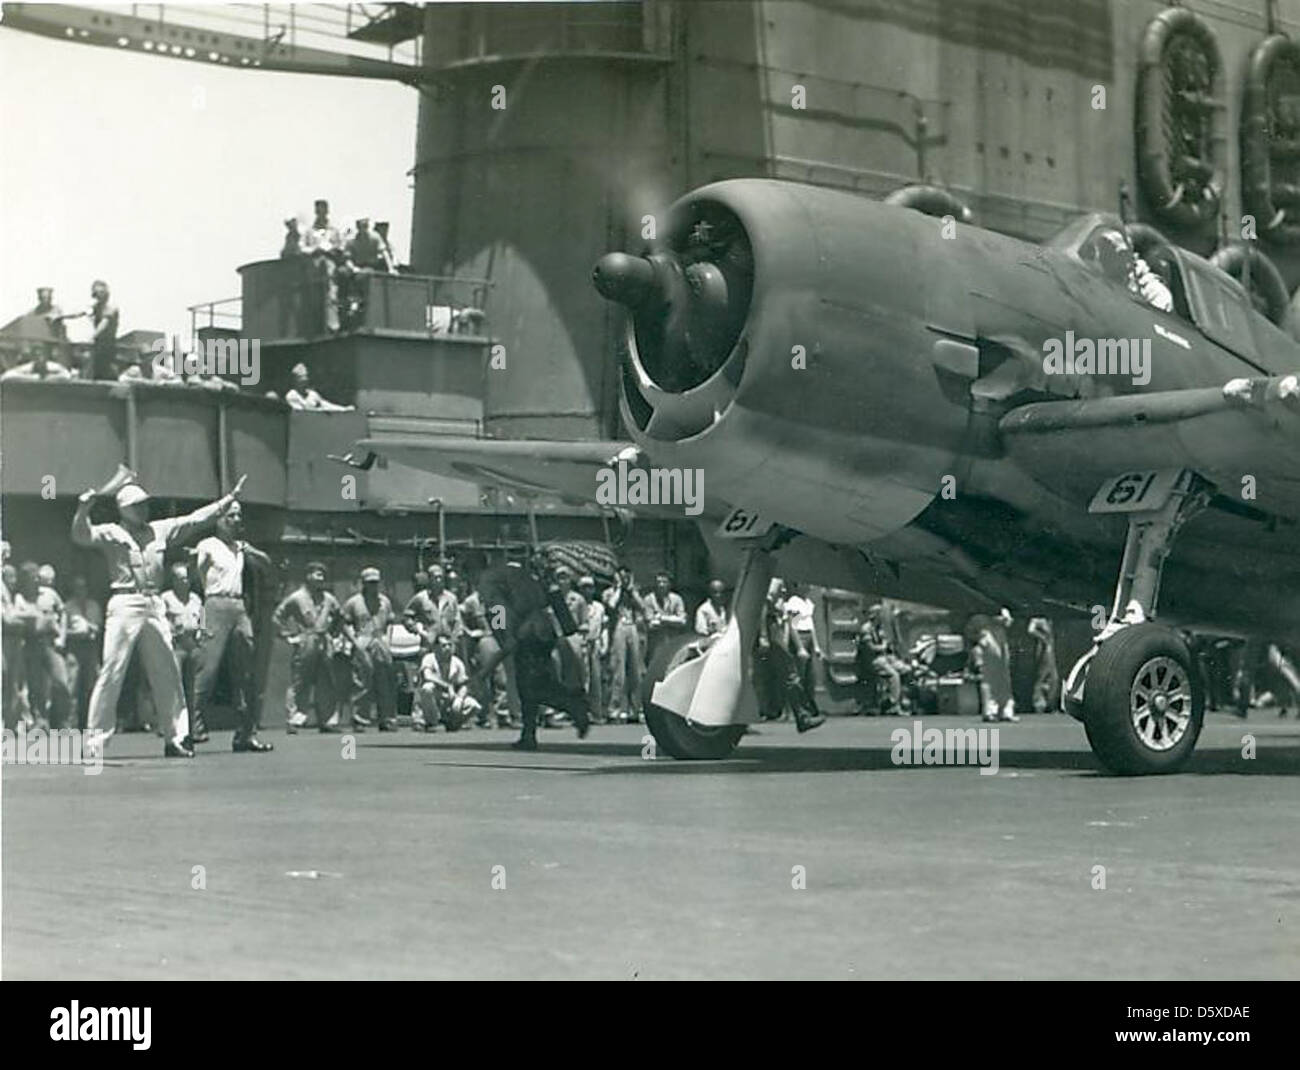 A Grumman F6F 'Hellcat' of FS (VF) 12 prepares to launch from the USS SARATOGA (CV-3) during 1943-1944. Stock Photo